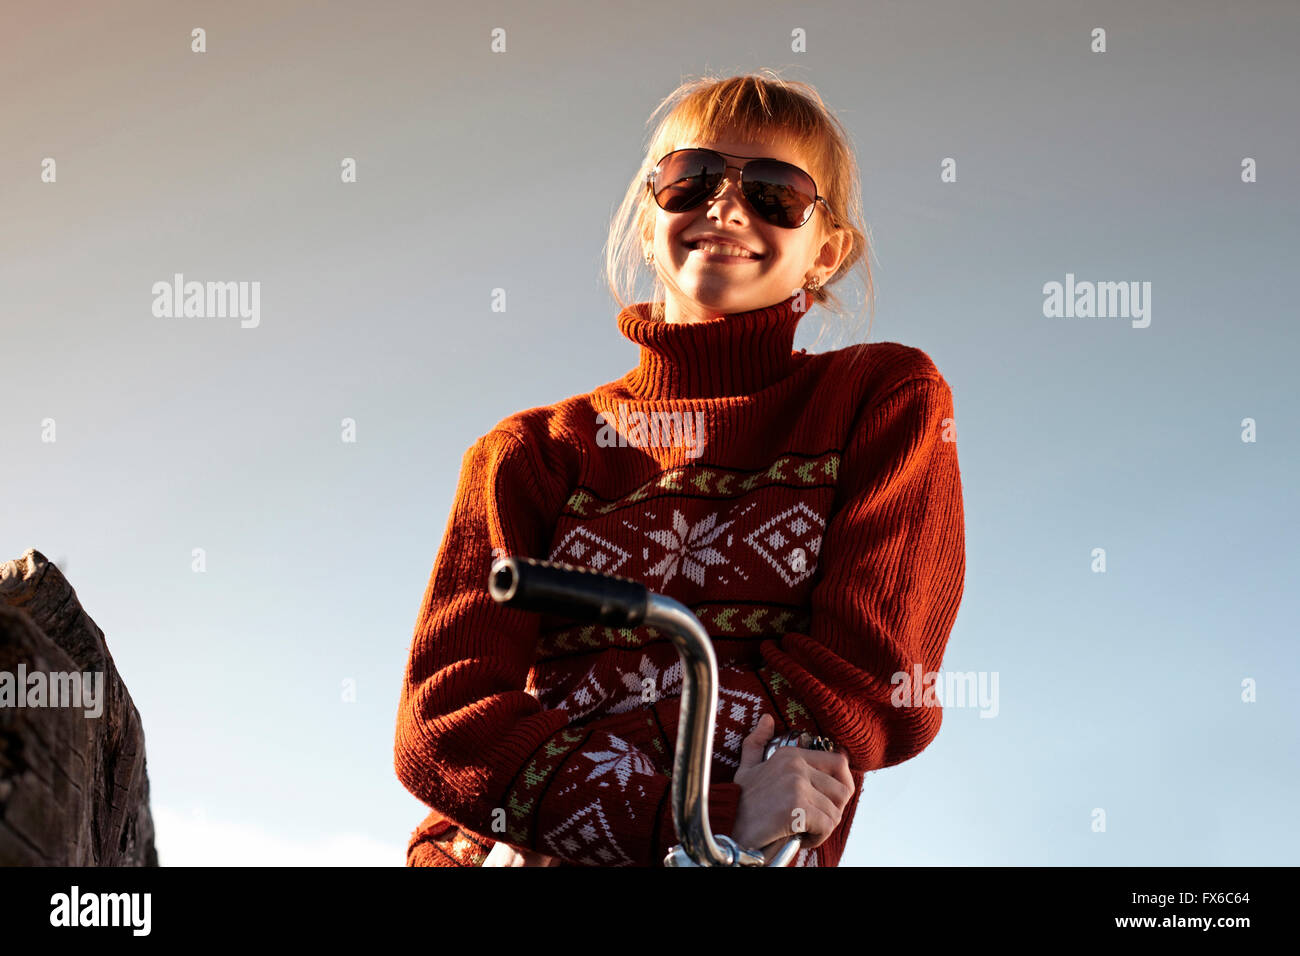 Caucasian girl smiling on bicycle Banque D'Images